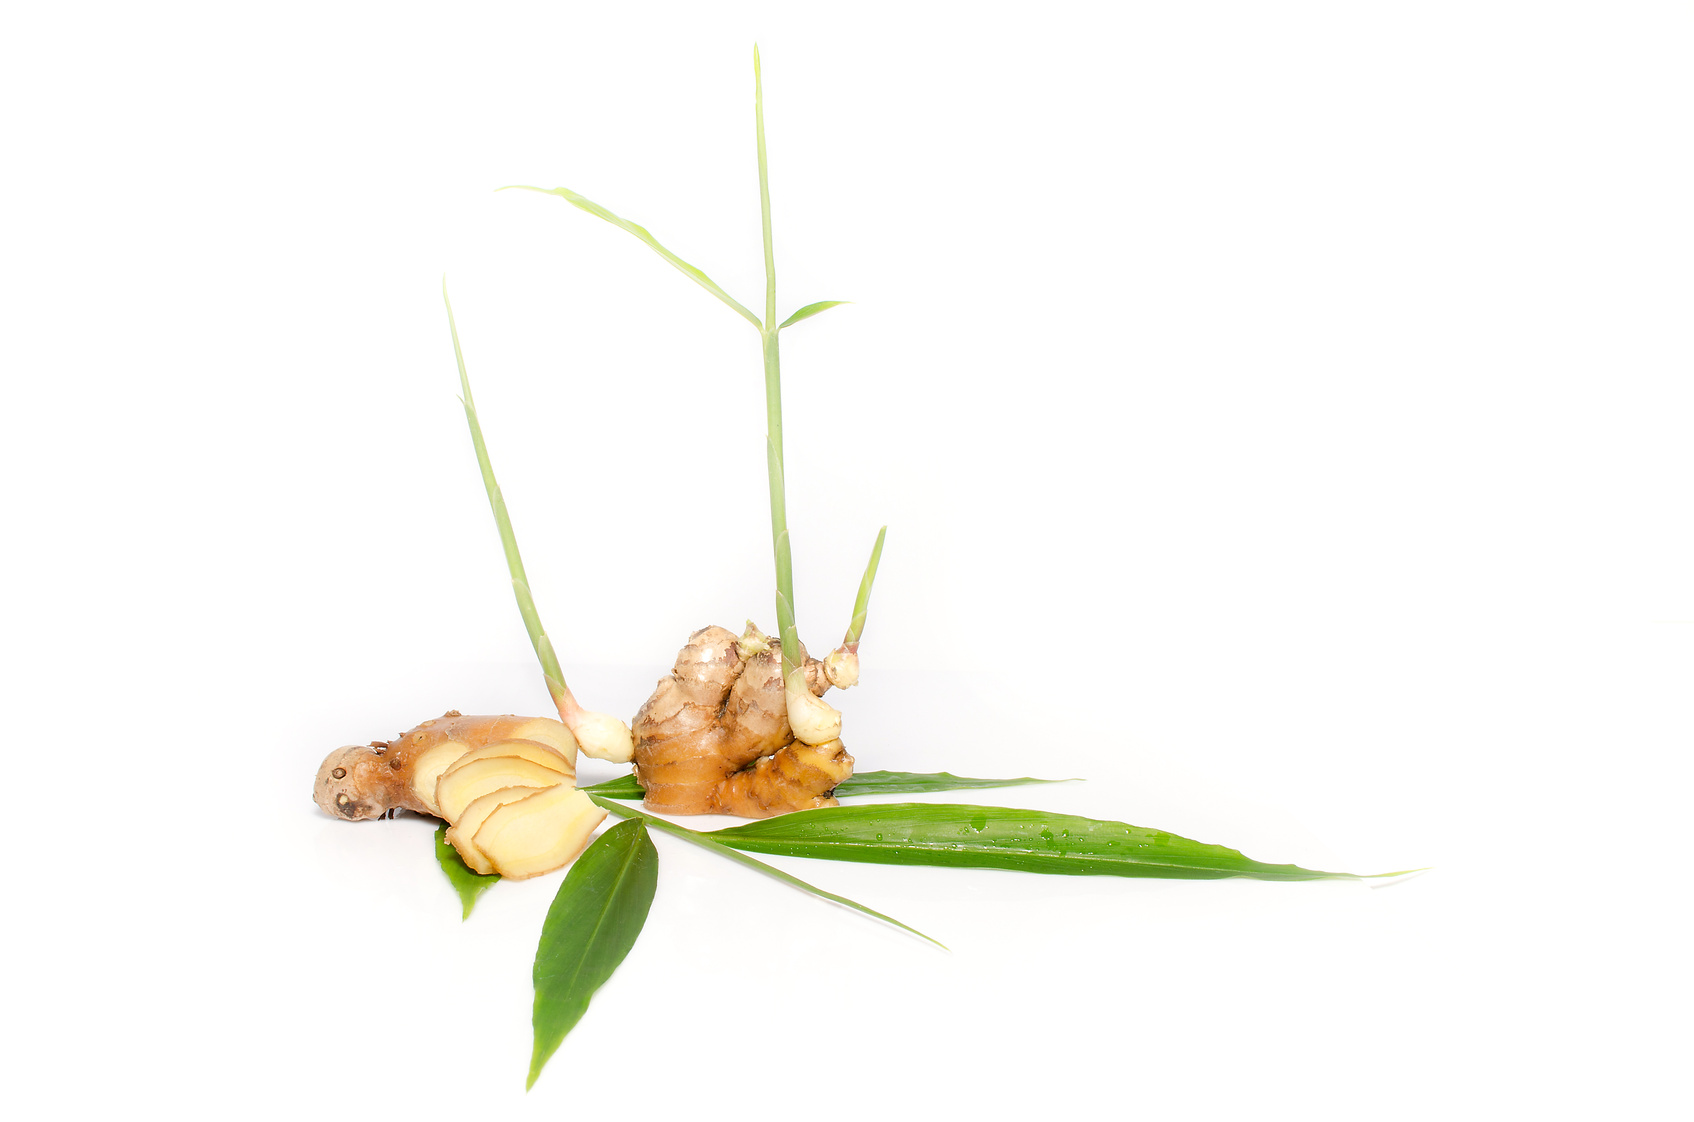 Ginger plant and root